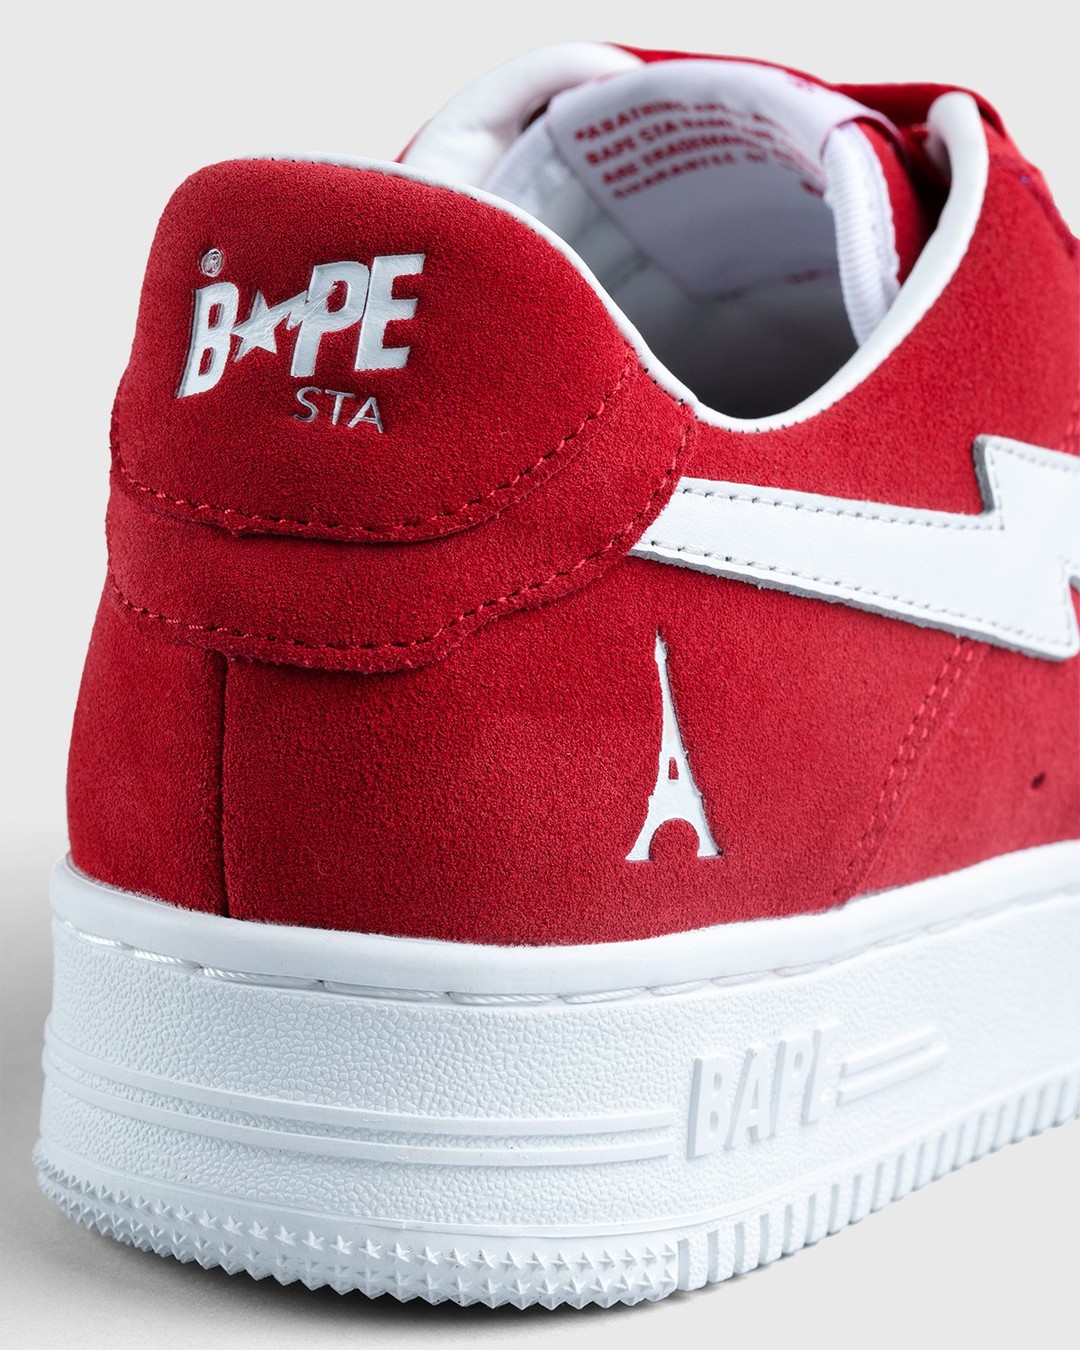 BAPE x Highsnobiety – BAPE STA Red - Sneakers - Red - Image 7